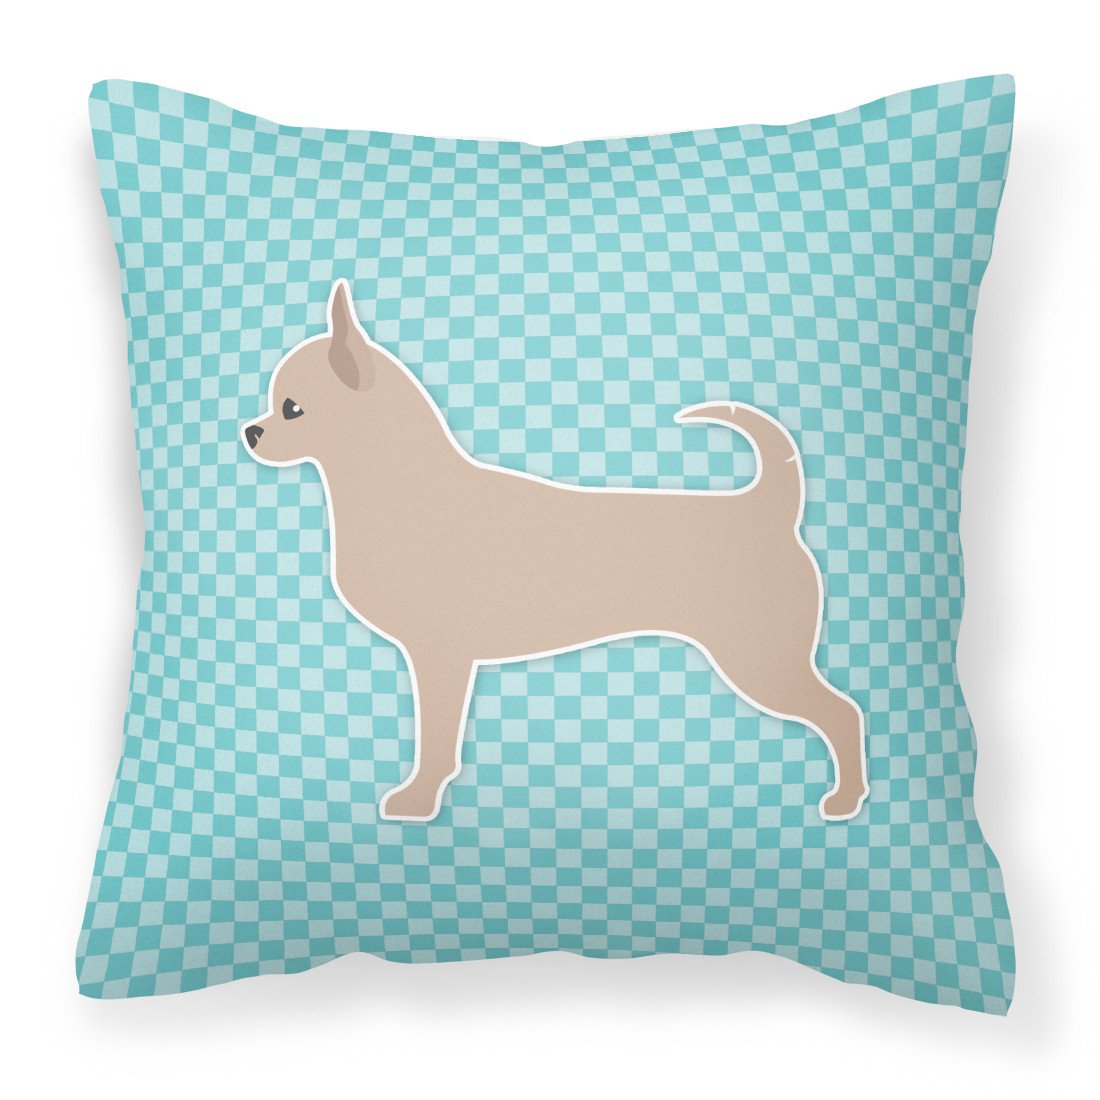 Chihuahua Checkerboard Blue Fabric Decorative Pillow BB3750PW1818 by Caroline's Treasures